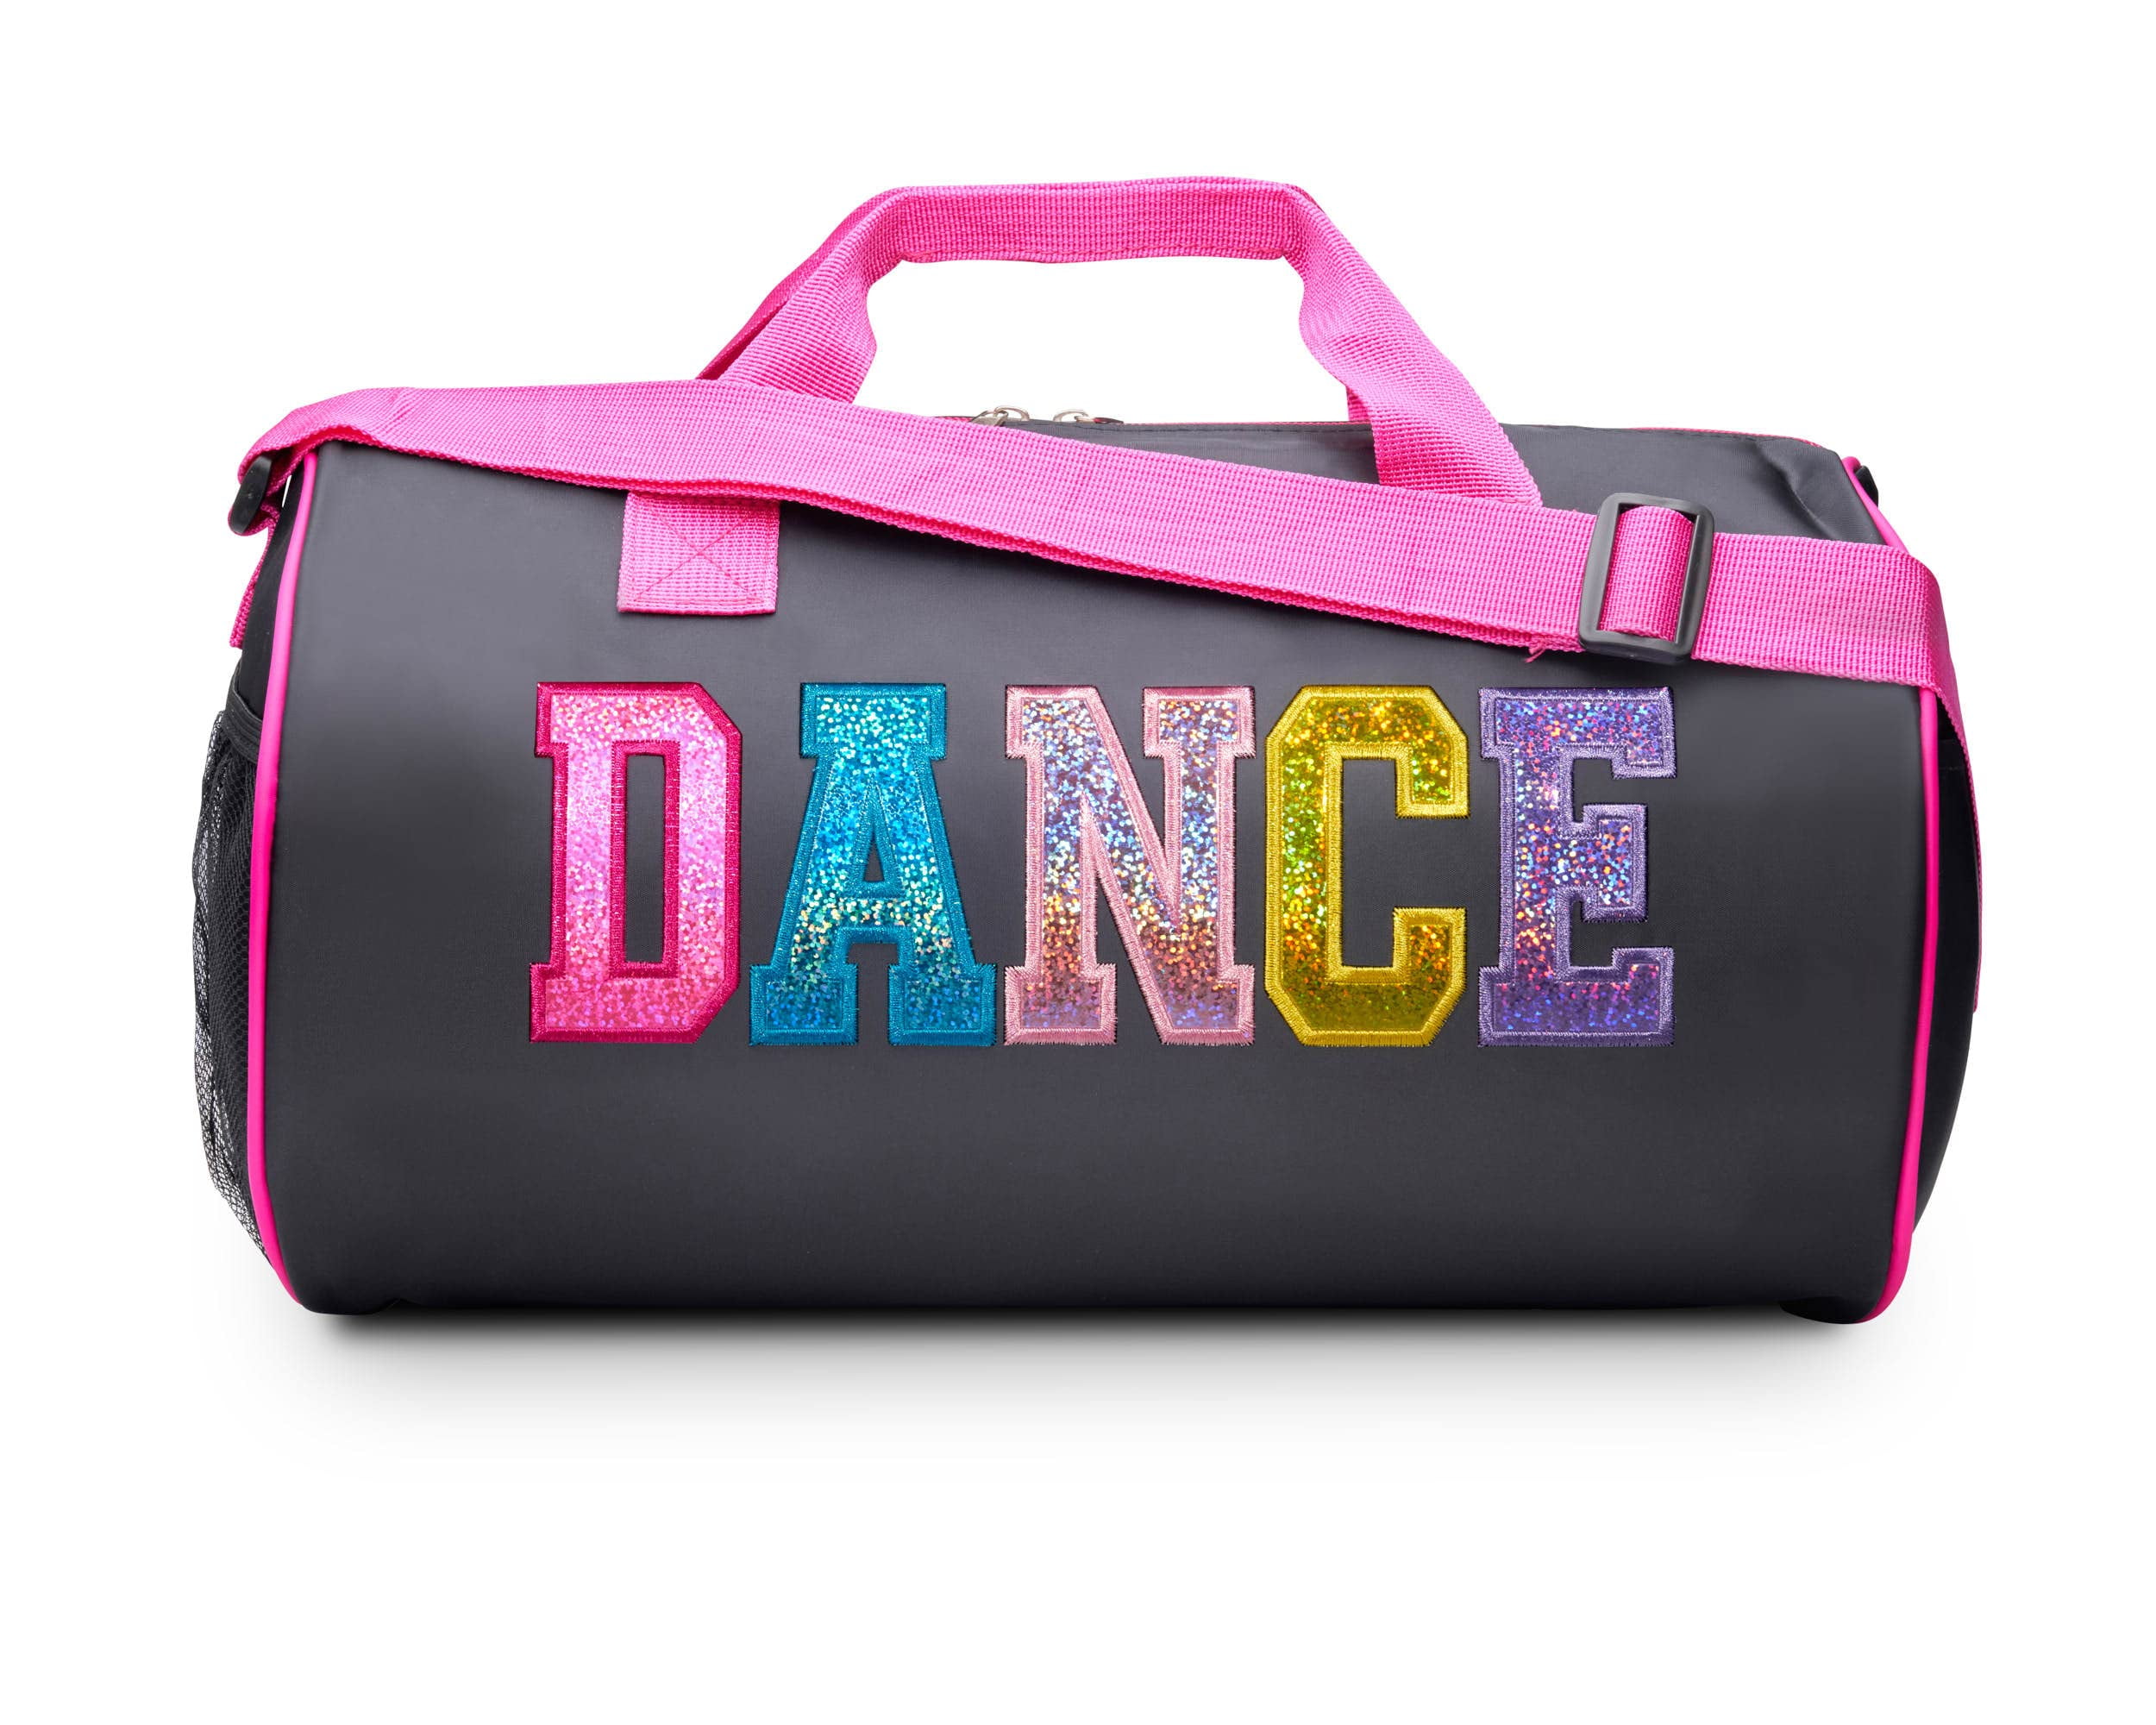 Dance Duffle Bag for Girls, Kids Travel Bag with Adjustable Carry on ...